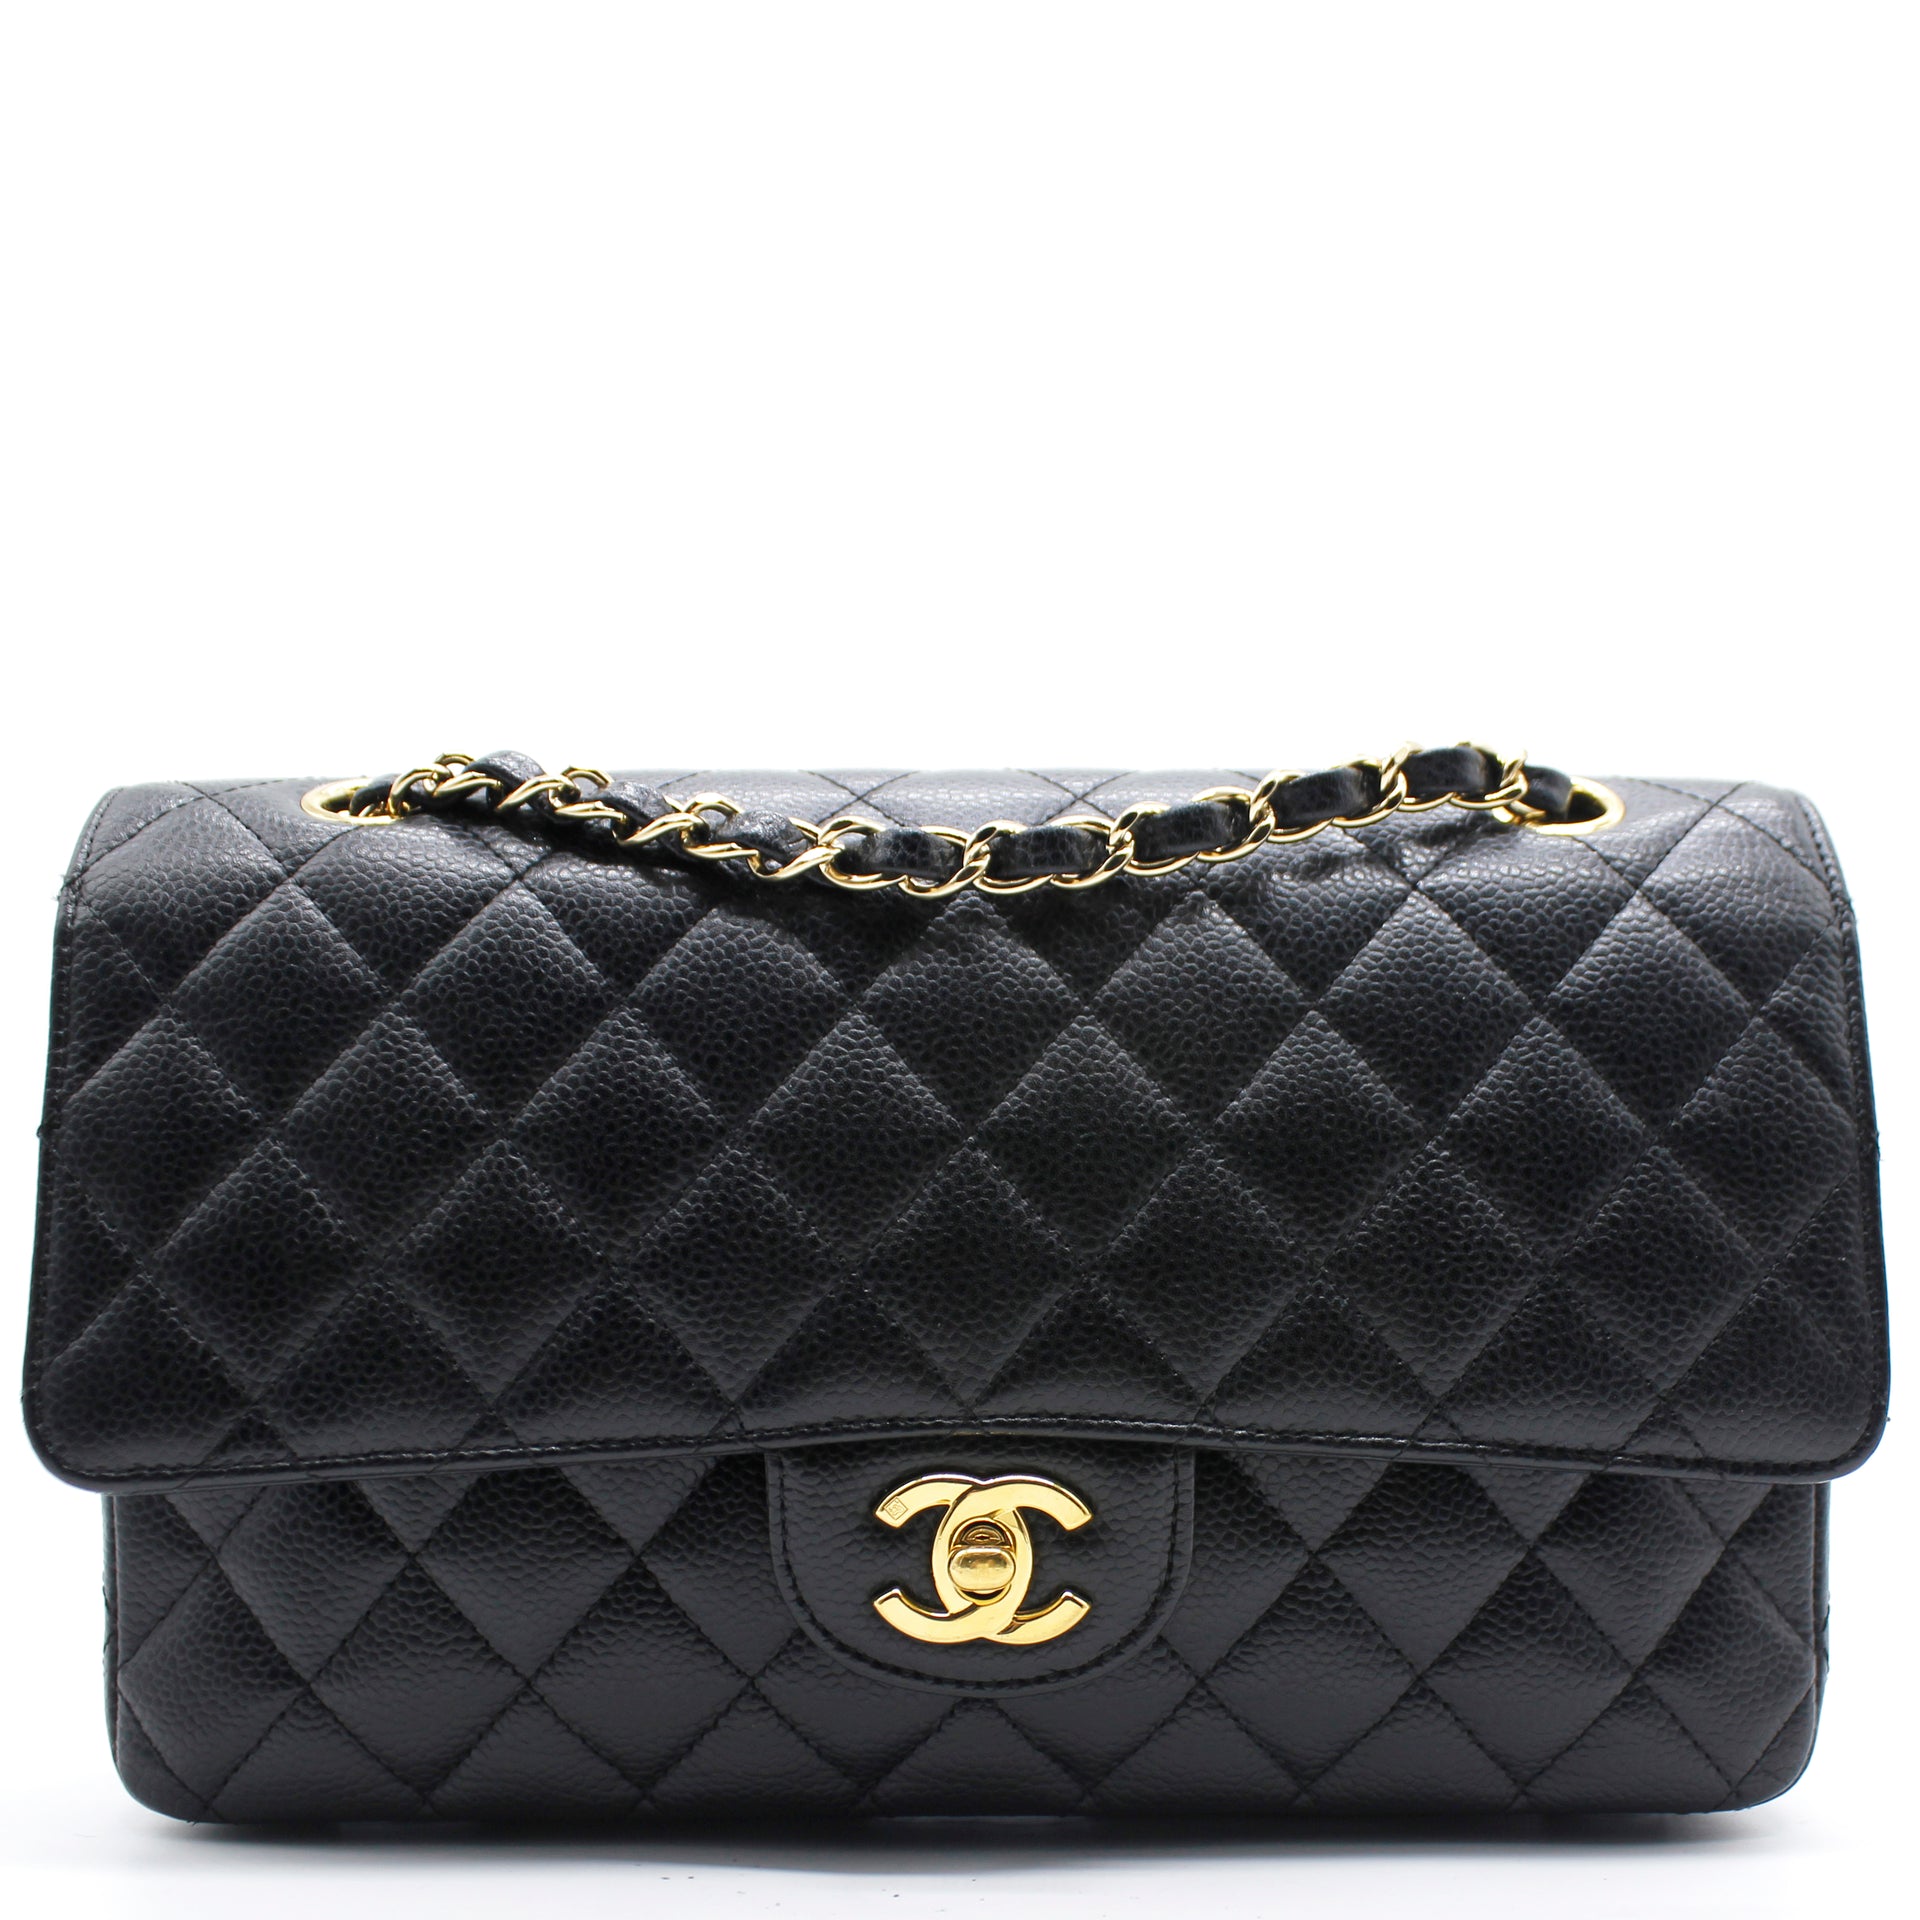 Chanel Flap Bag Mini Black in Lambskin Leather with Goldtone  US